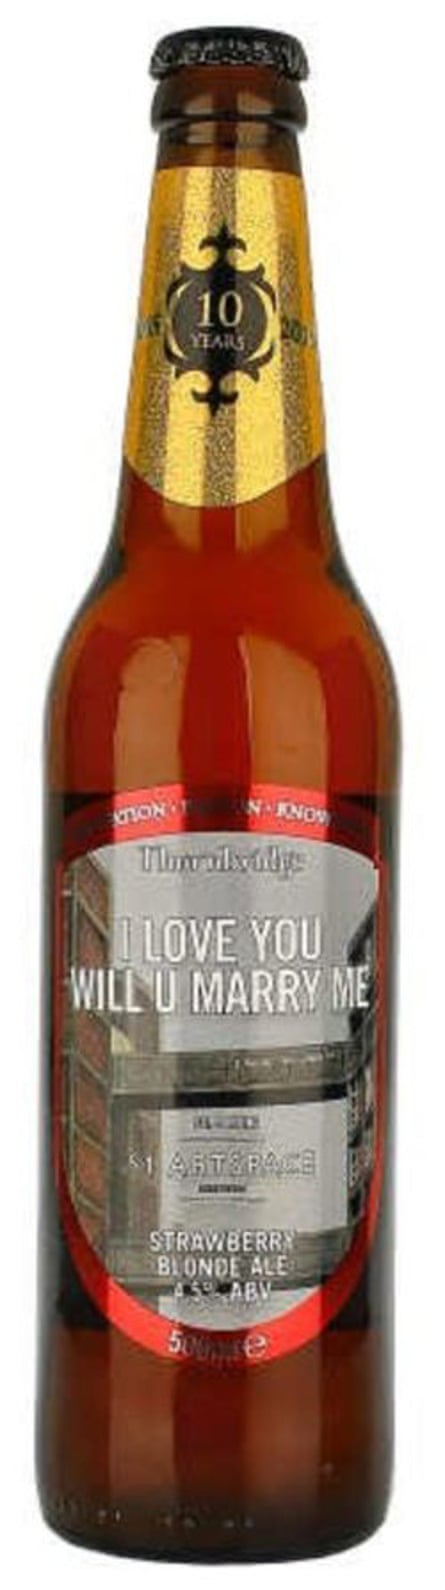 A bottle of beer with 'I love you will u marry me' on the label